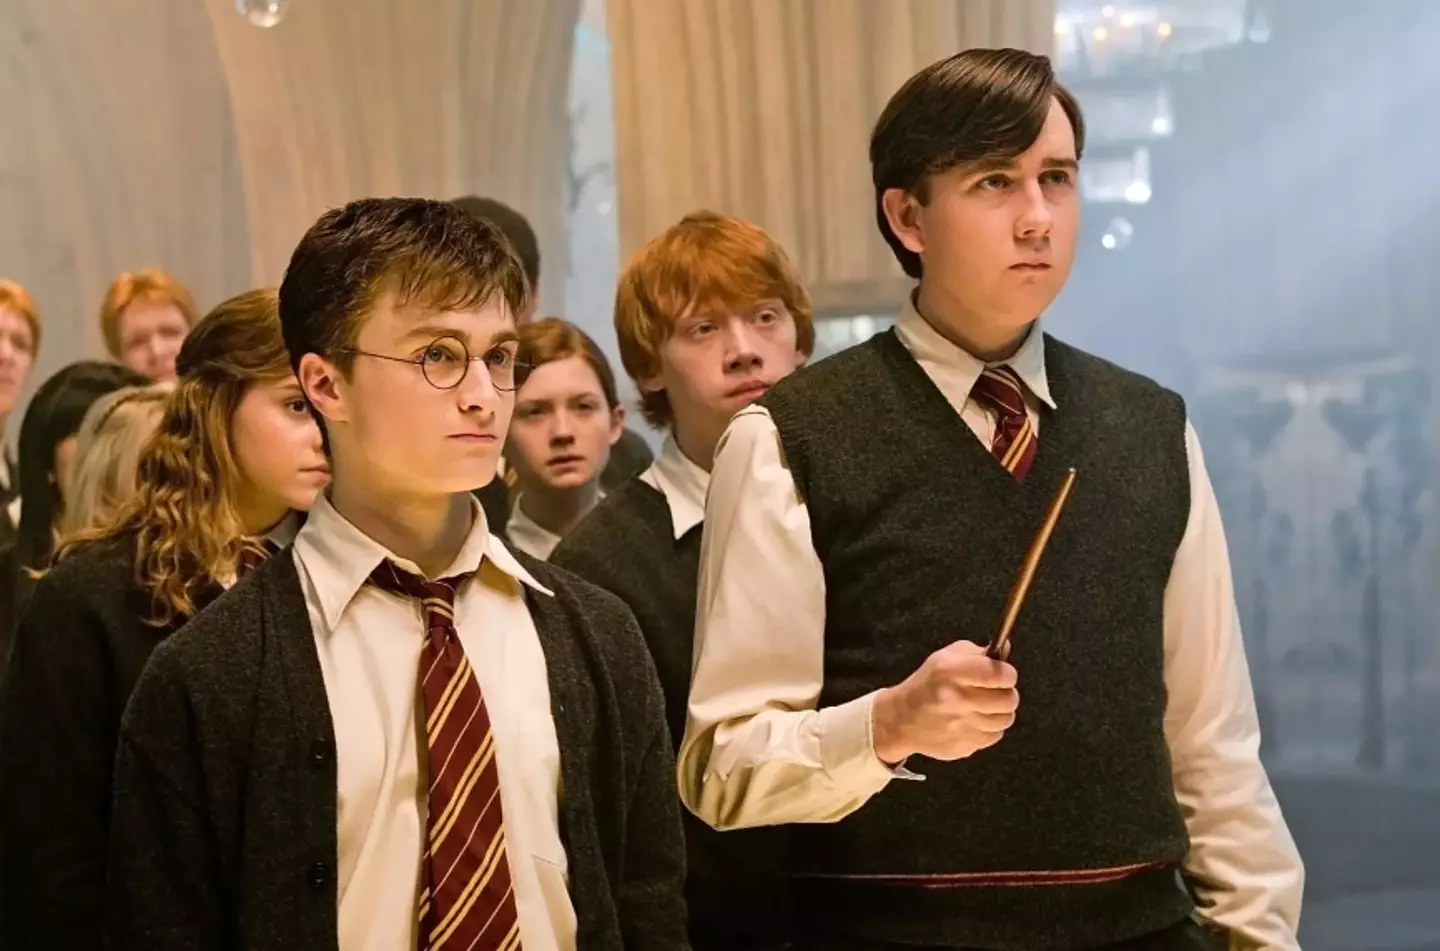 It's going to be strange seeing someone other than Daniel Radcliffe as Harry Potter.